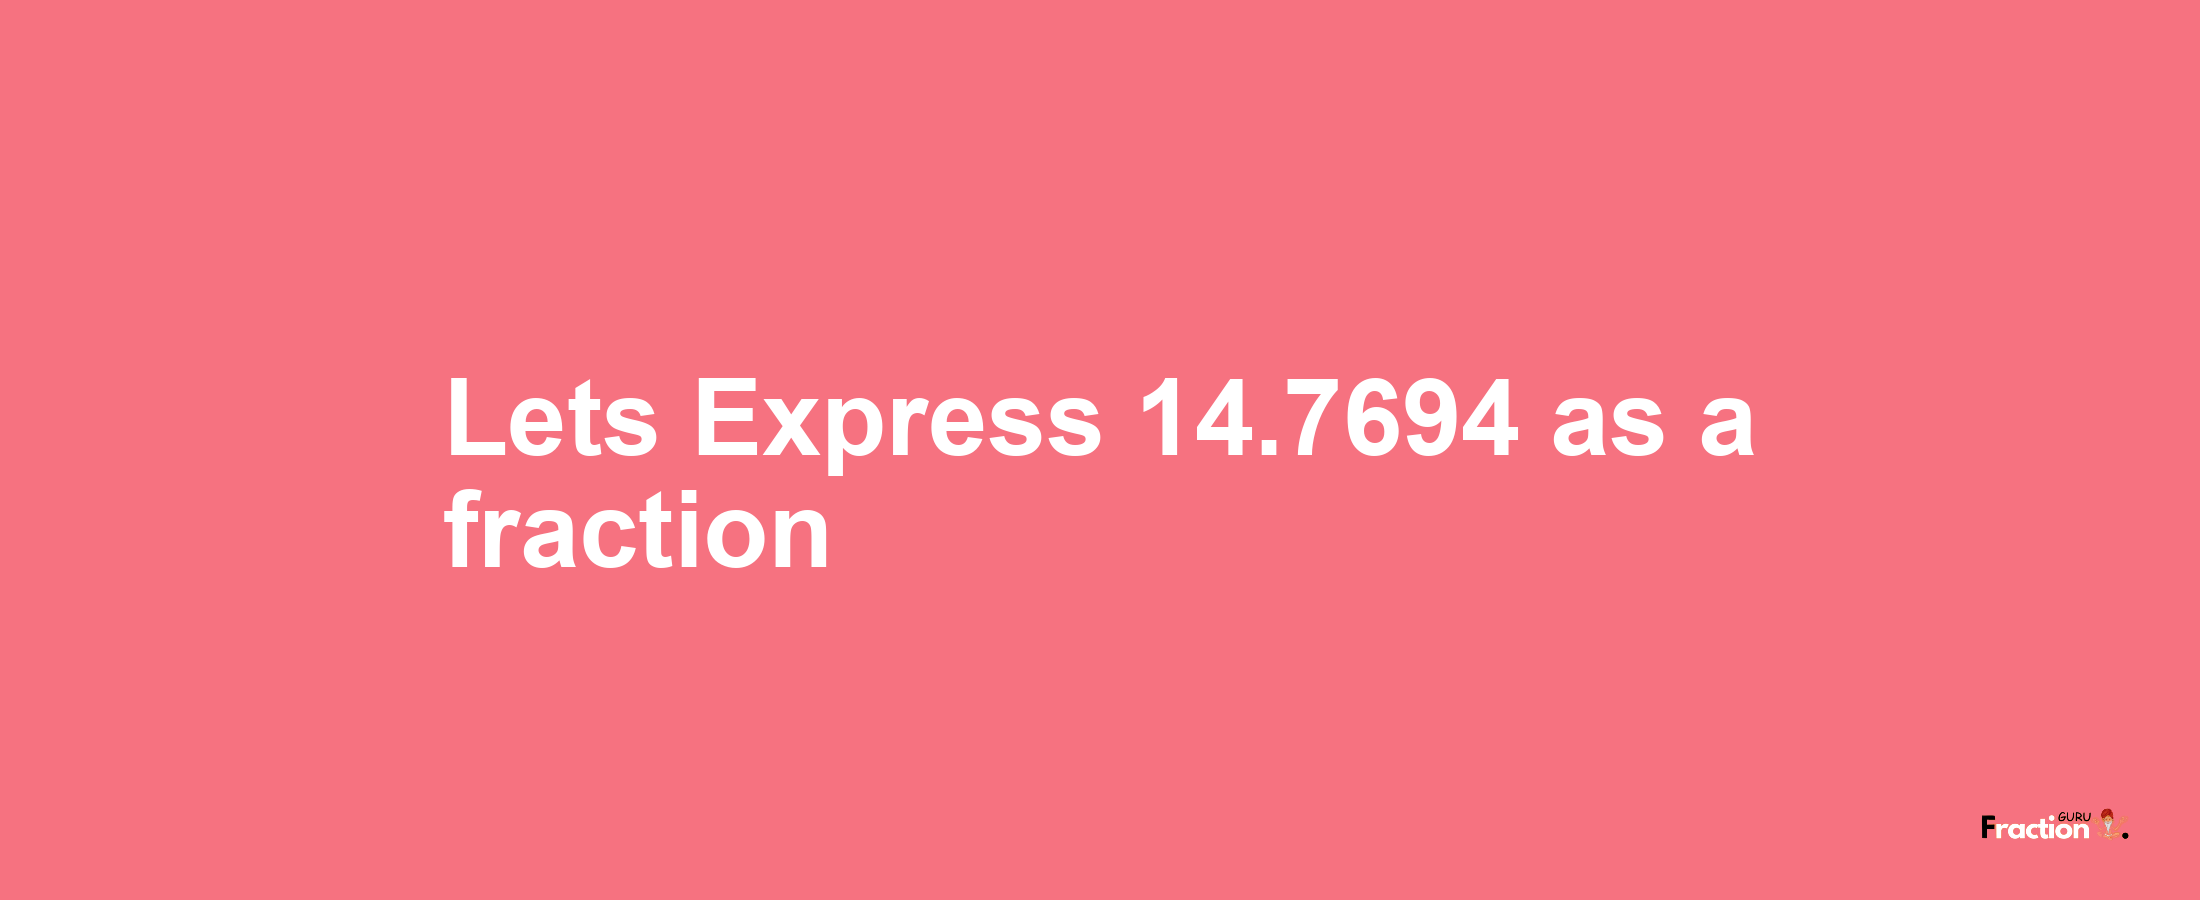 Lets Express 14.7694 as afraction